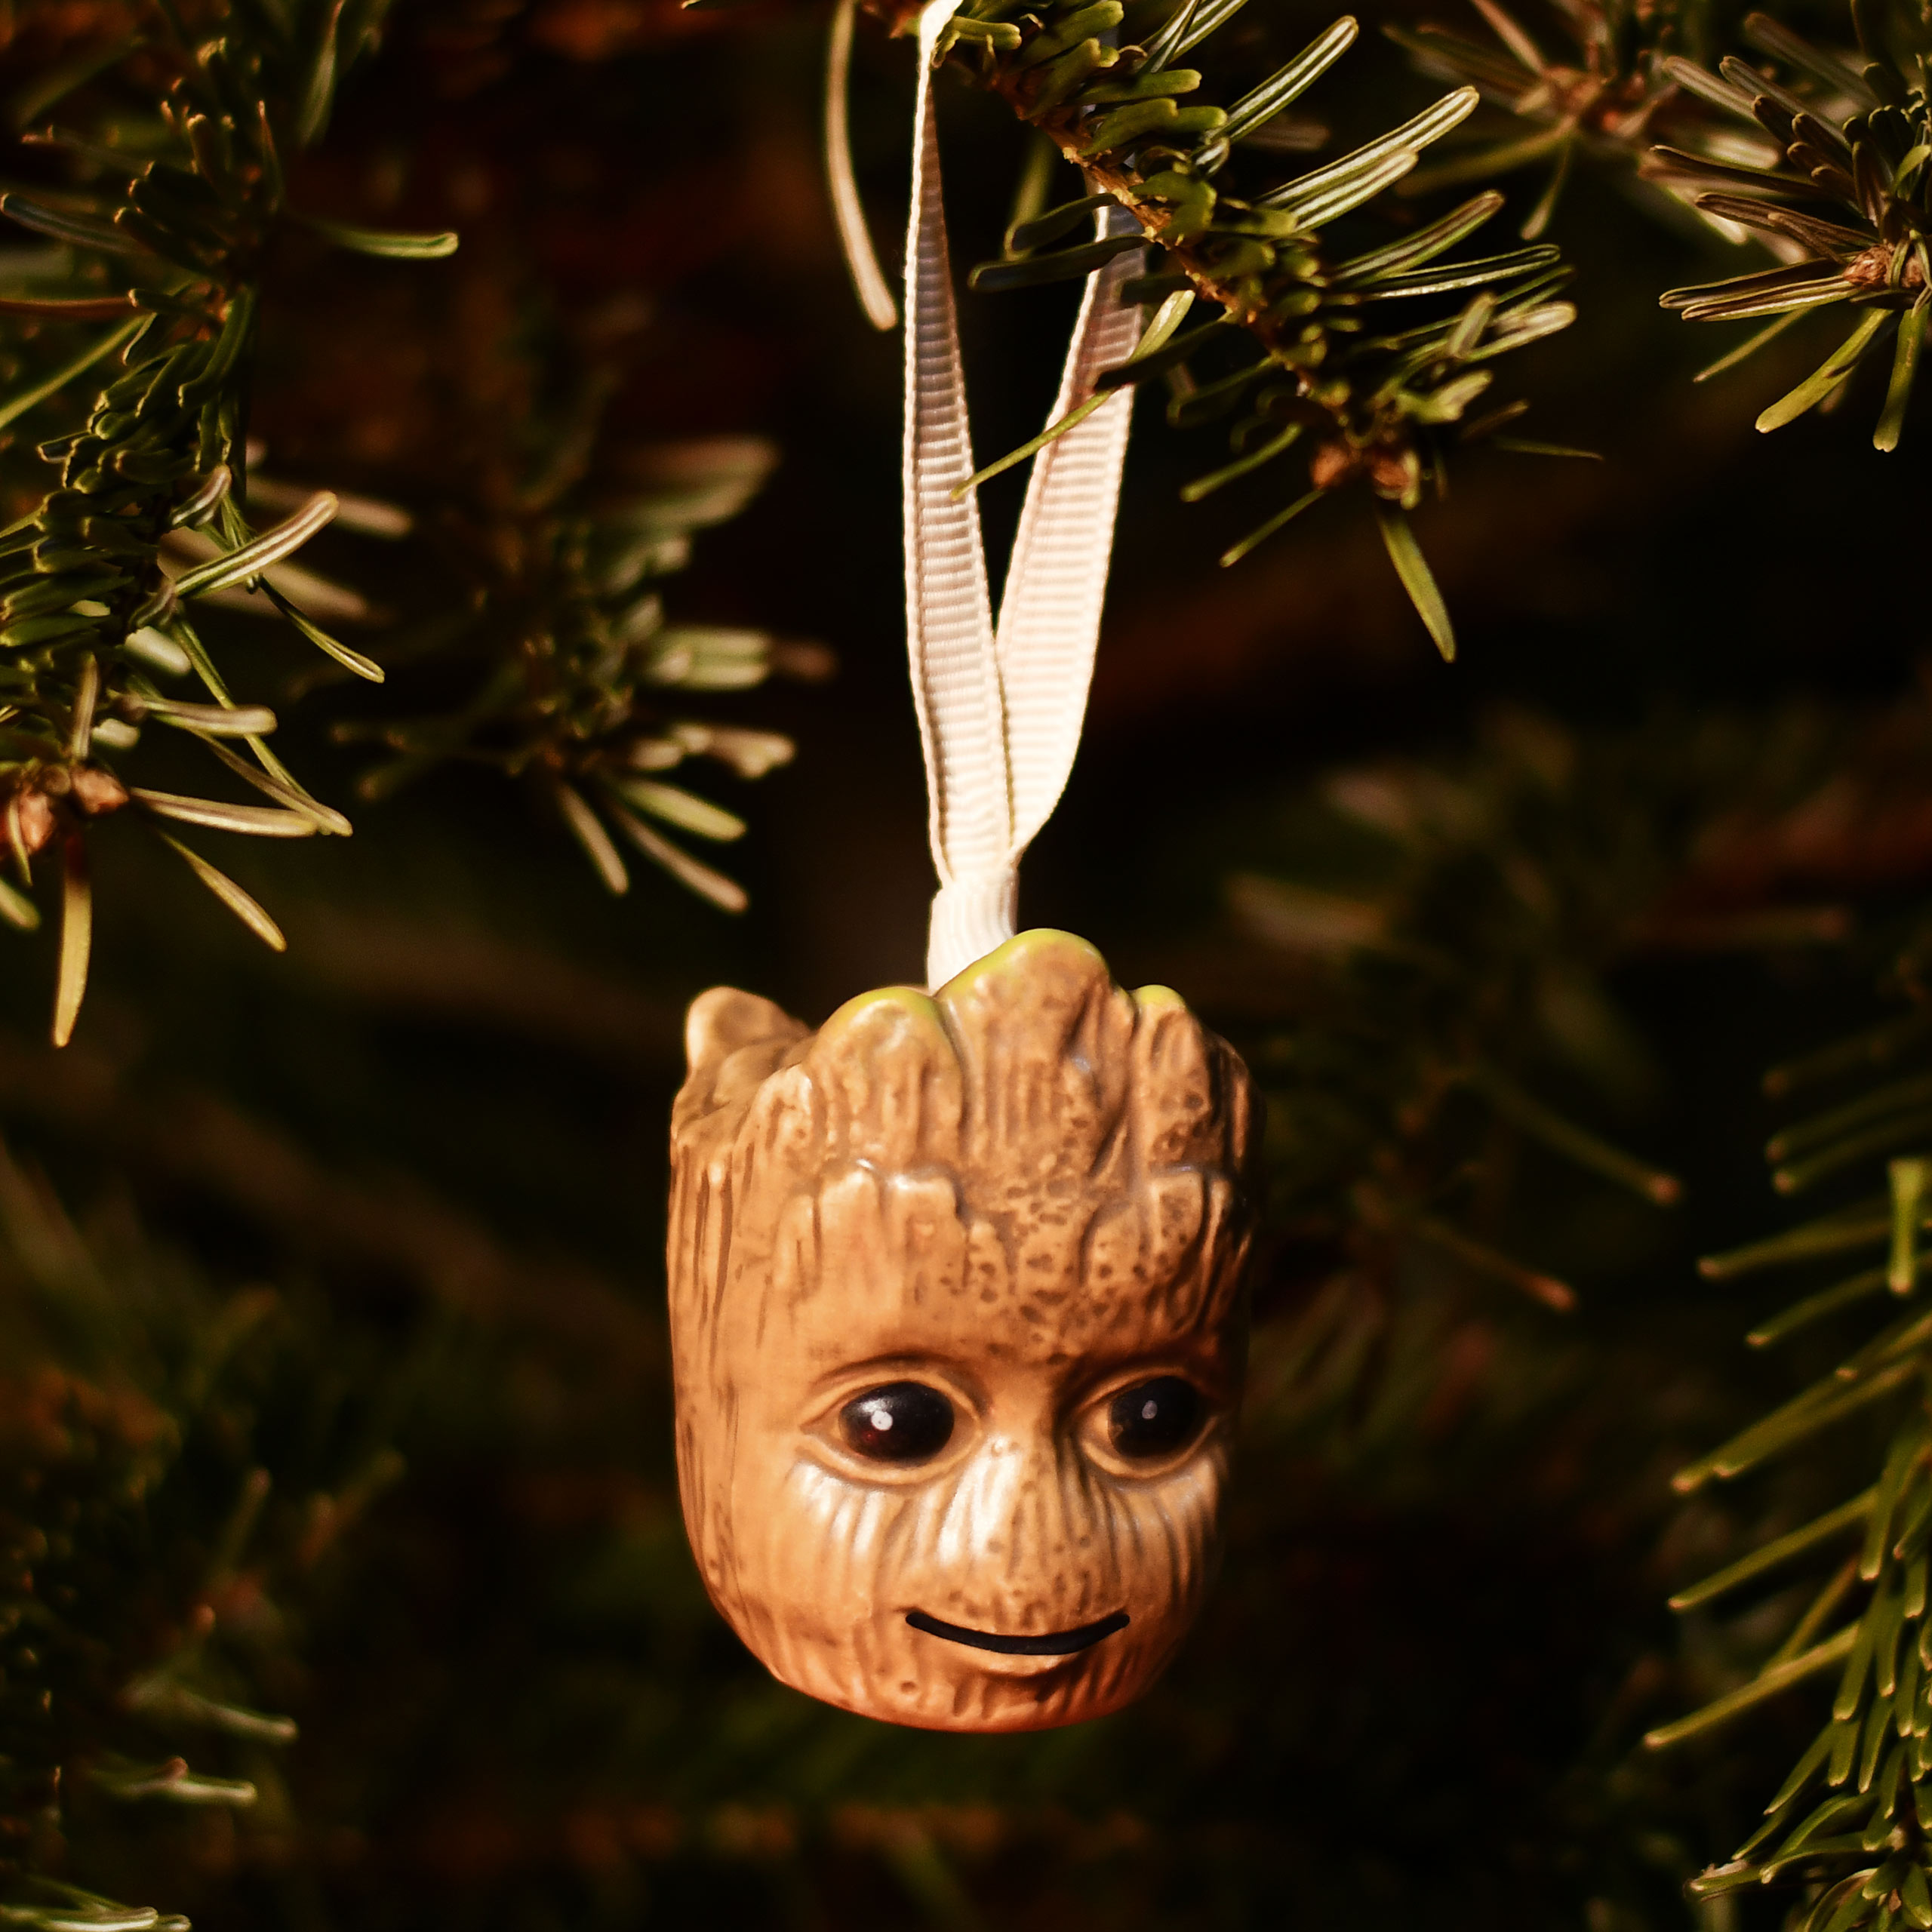 Groot Christmas Tree Ornament - Guardians of the Galaxy